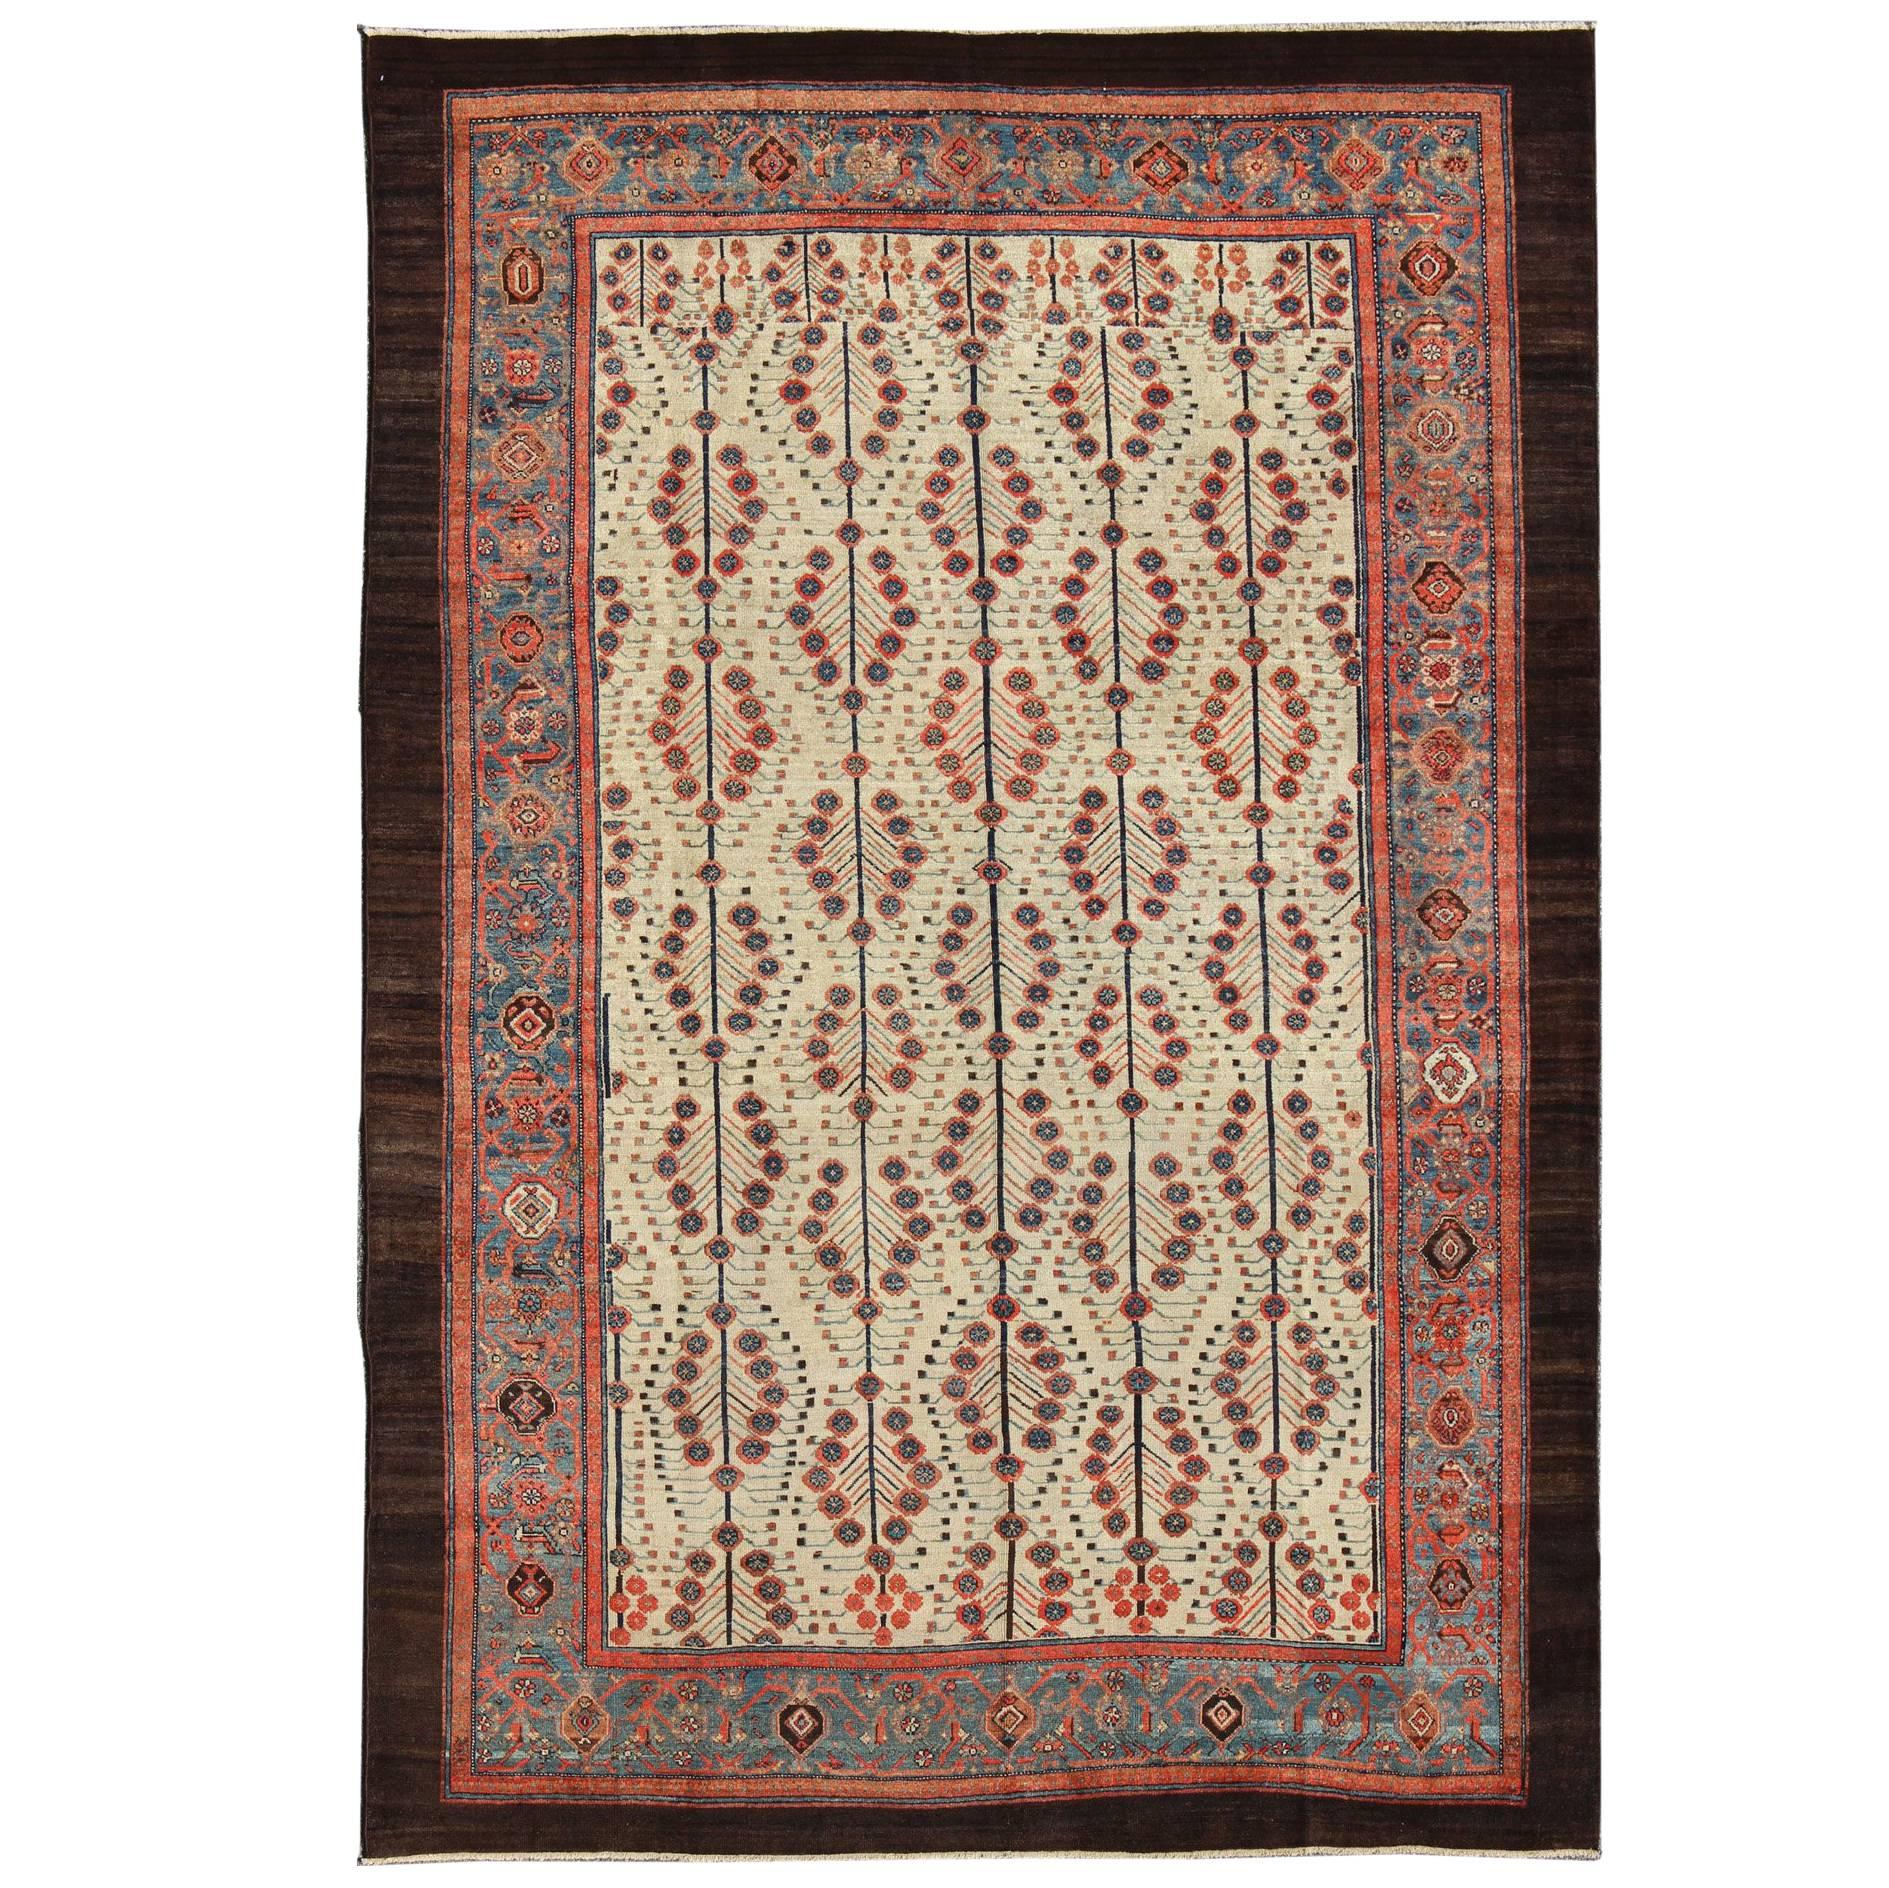 Antique Persian Serab Rug with Tree Design in Cream, Red, Blue and Brown Colors For Sale